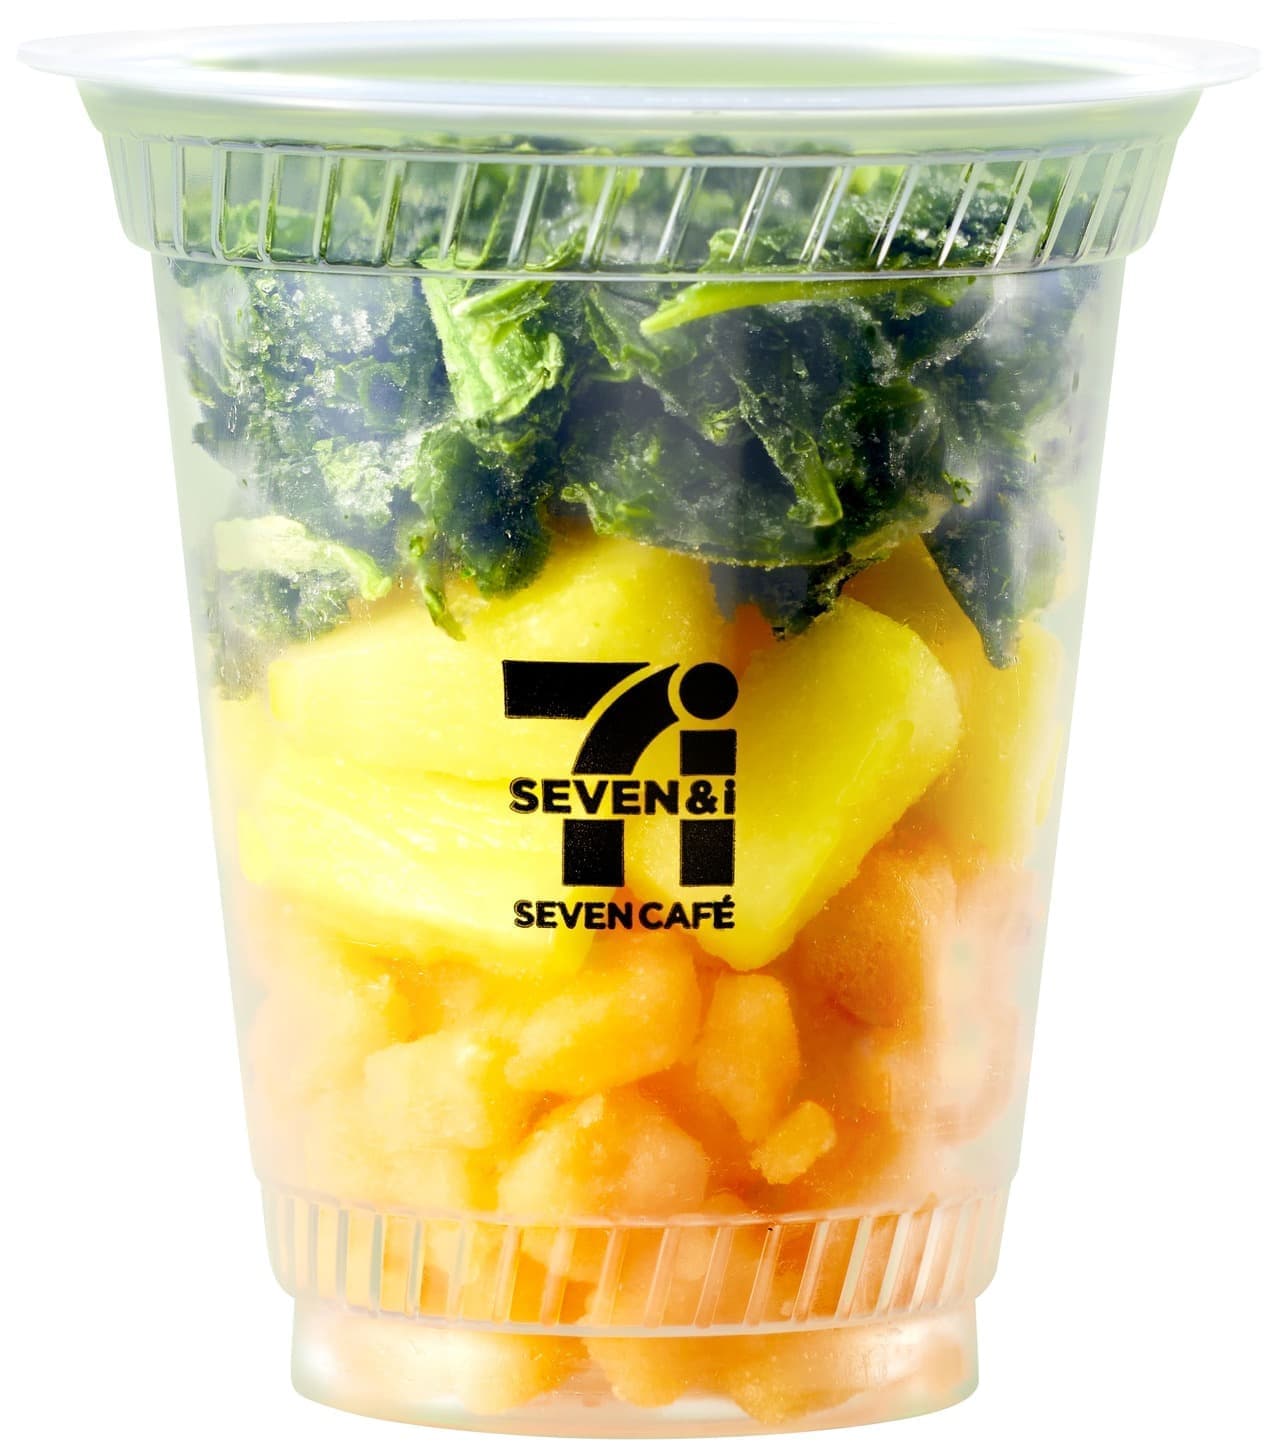 7-ELEVEN "Green Smoothies Made at the Store